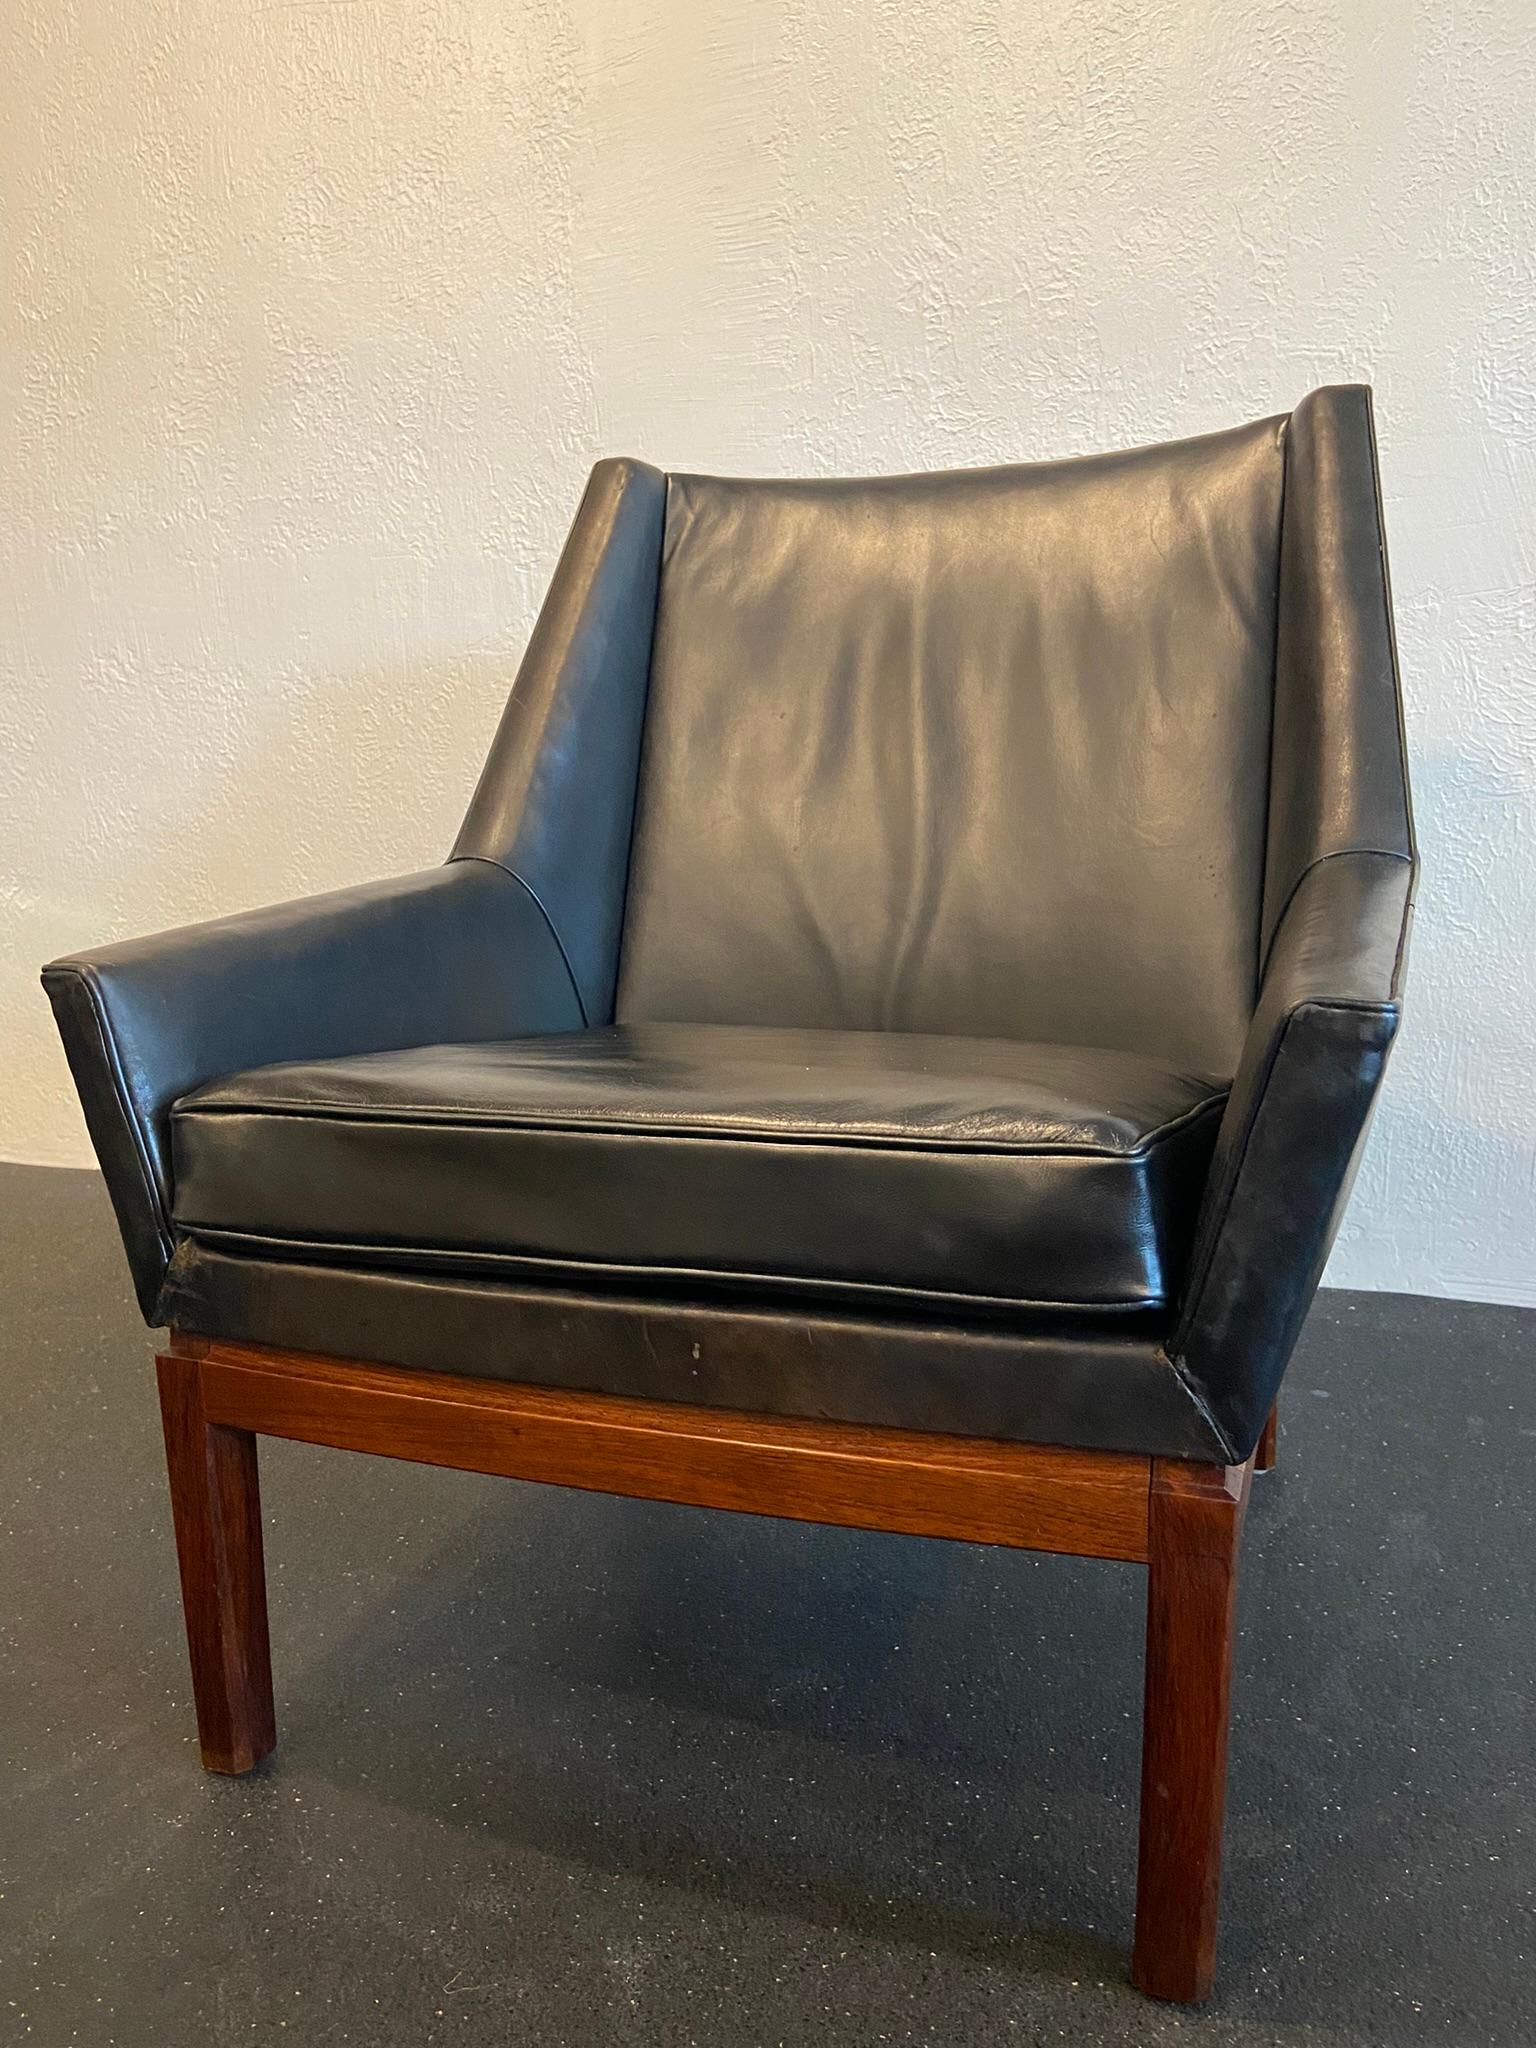 Erik Kolling Andersen for Peder Pedersen easy chair. Original black leather with warm patina on a rosewood base. Seat cushion has been redone in an almost seamlessly matched leather. Areas of wear to leather but no rips or tears (please refer to